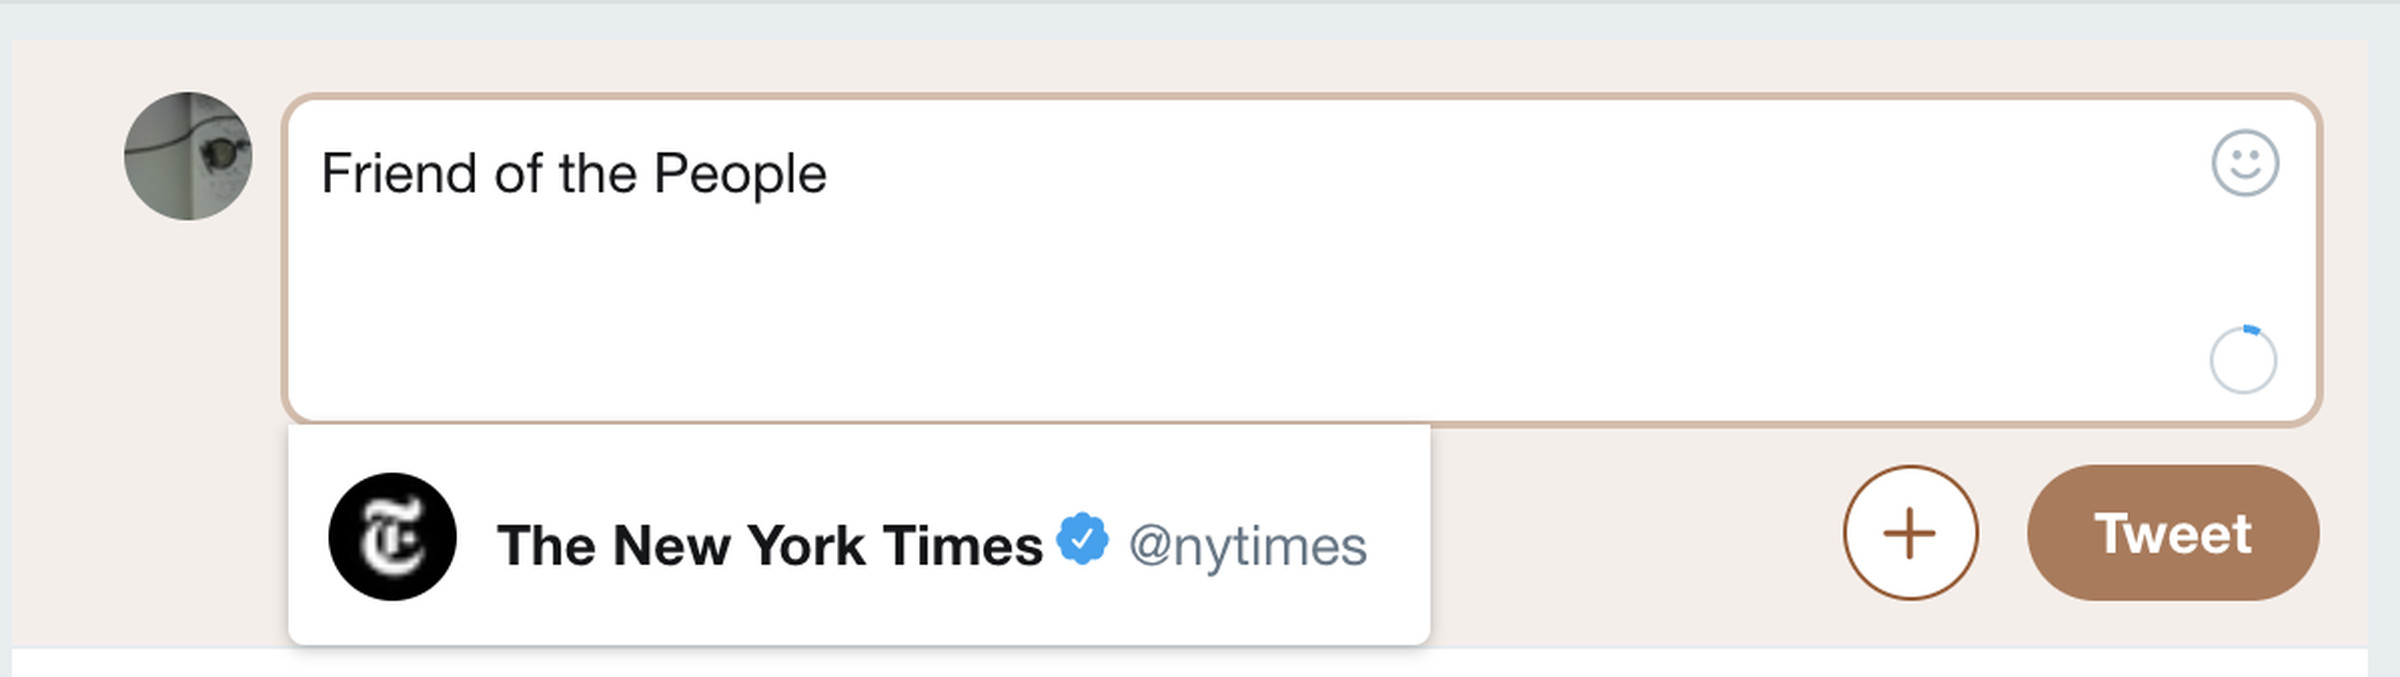 Twitter, New York Times: Friend of the People